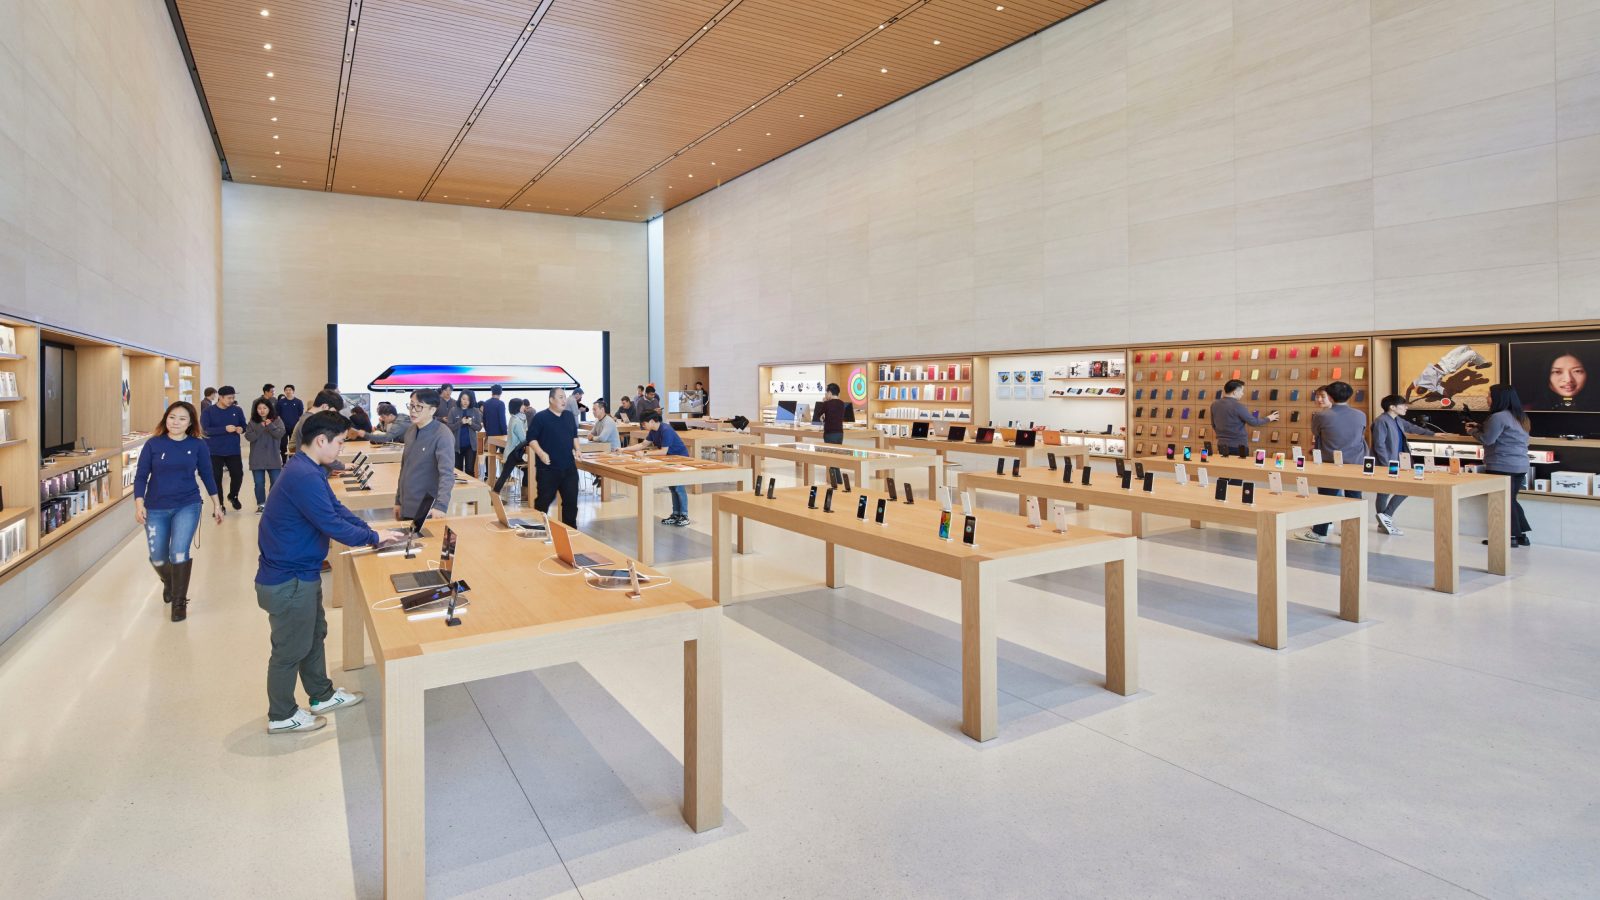 Head of engineering for Apple Retail departing company after 10 years ...